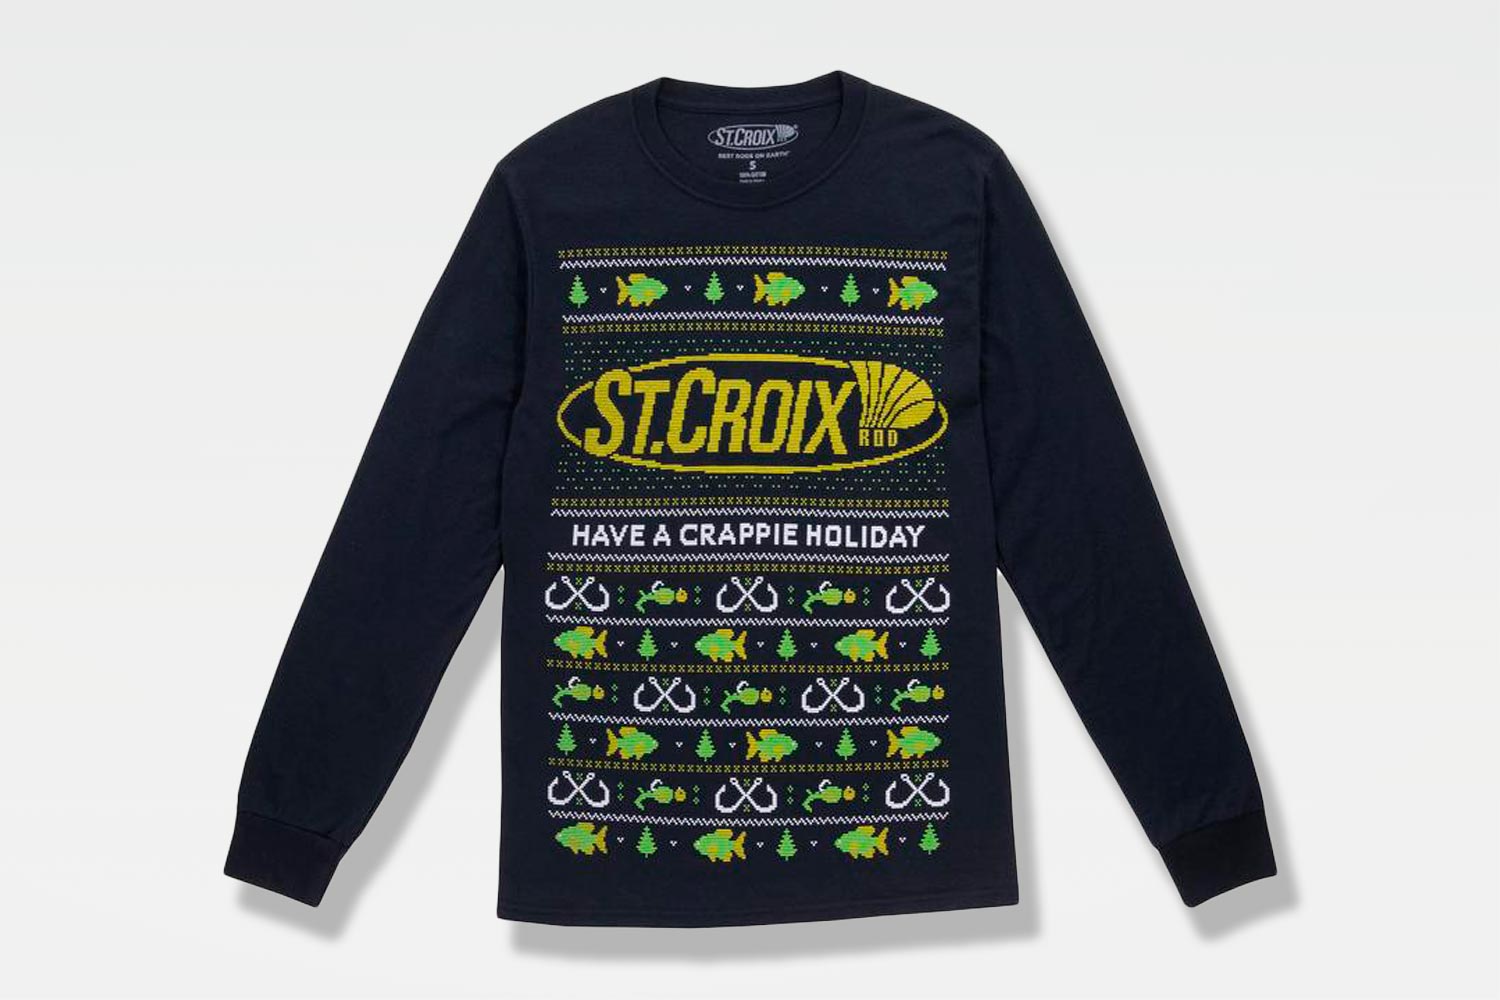 St. Croix – T-Shirt Manches Longues – Have a Crappie Holiday